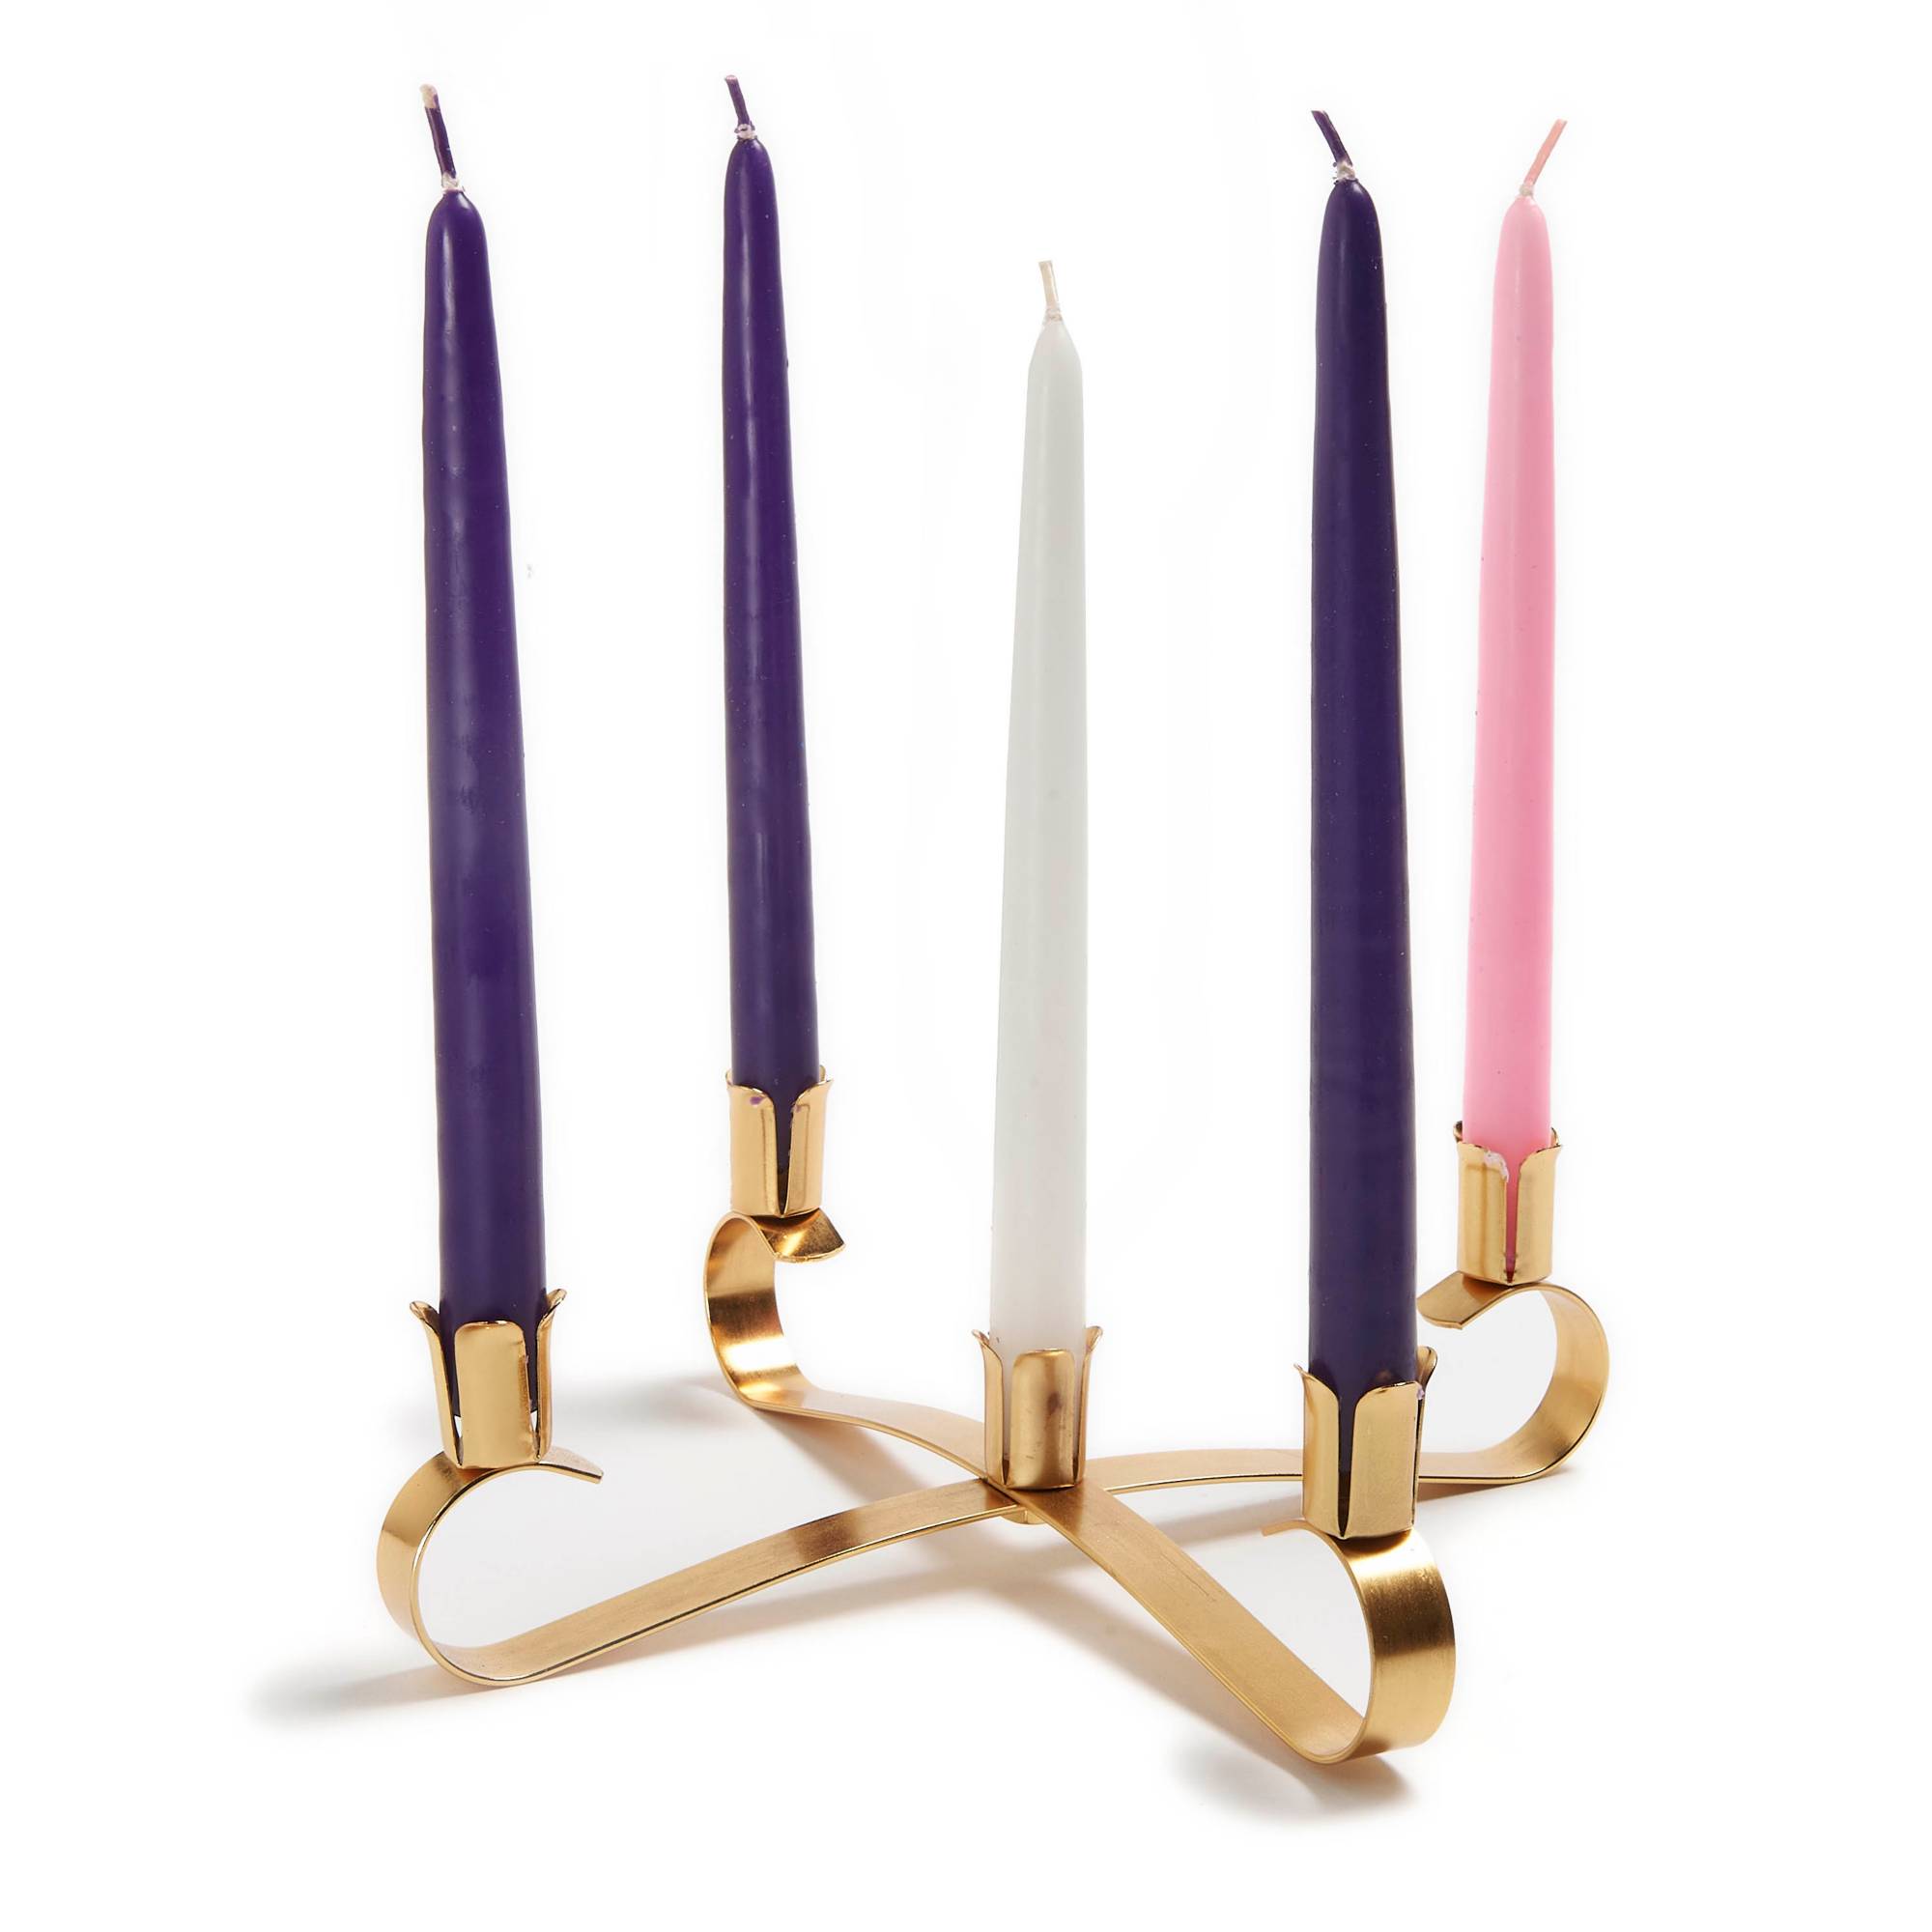 Candle Ring - Purple - 4/pk